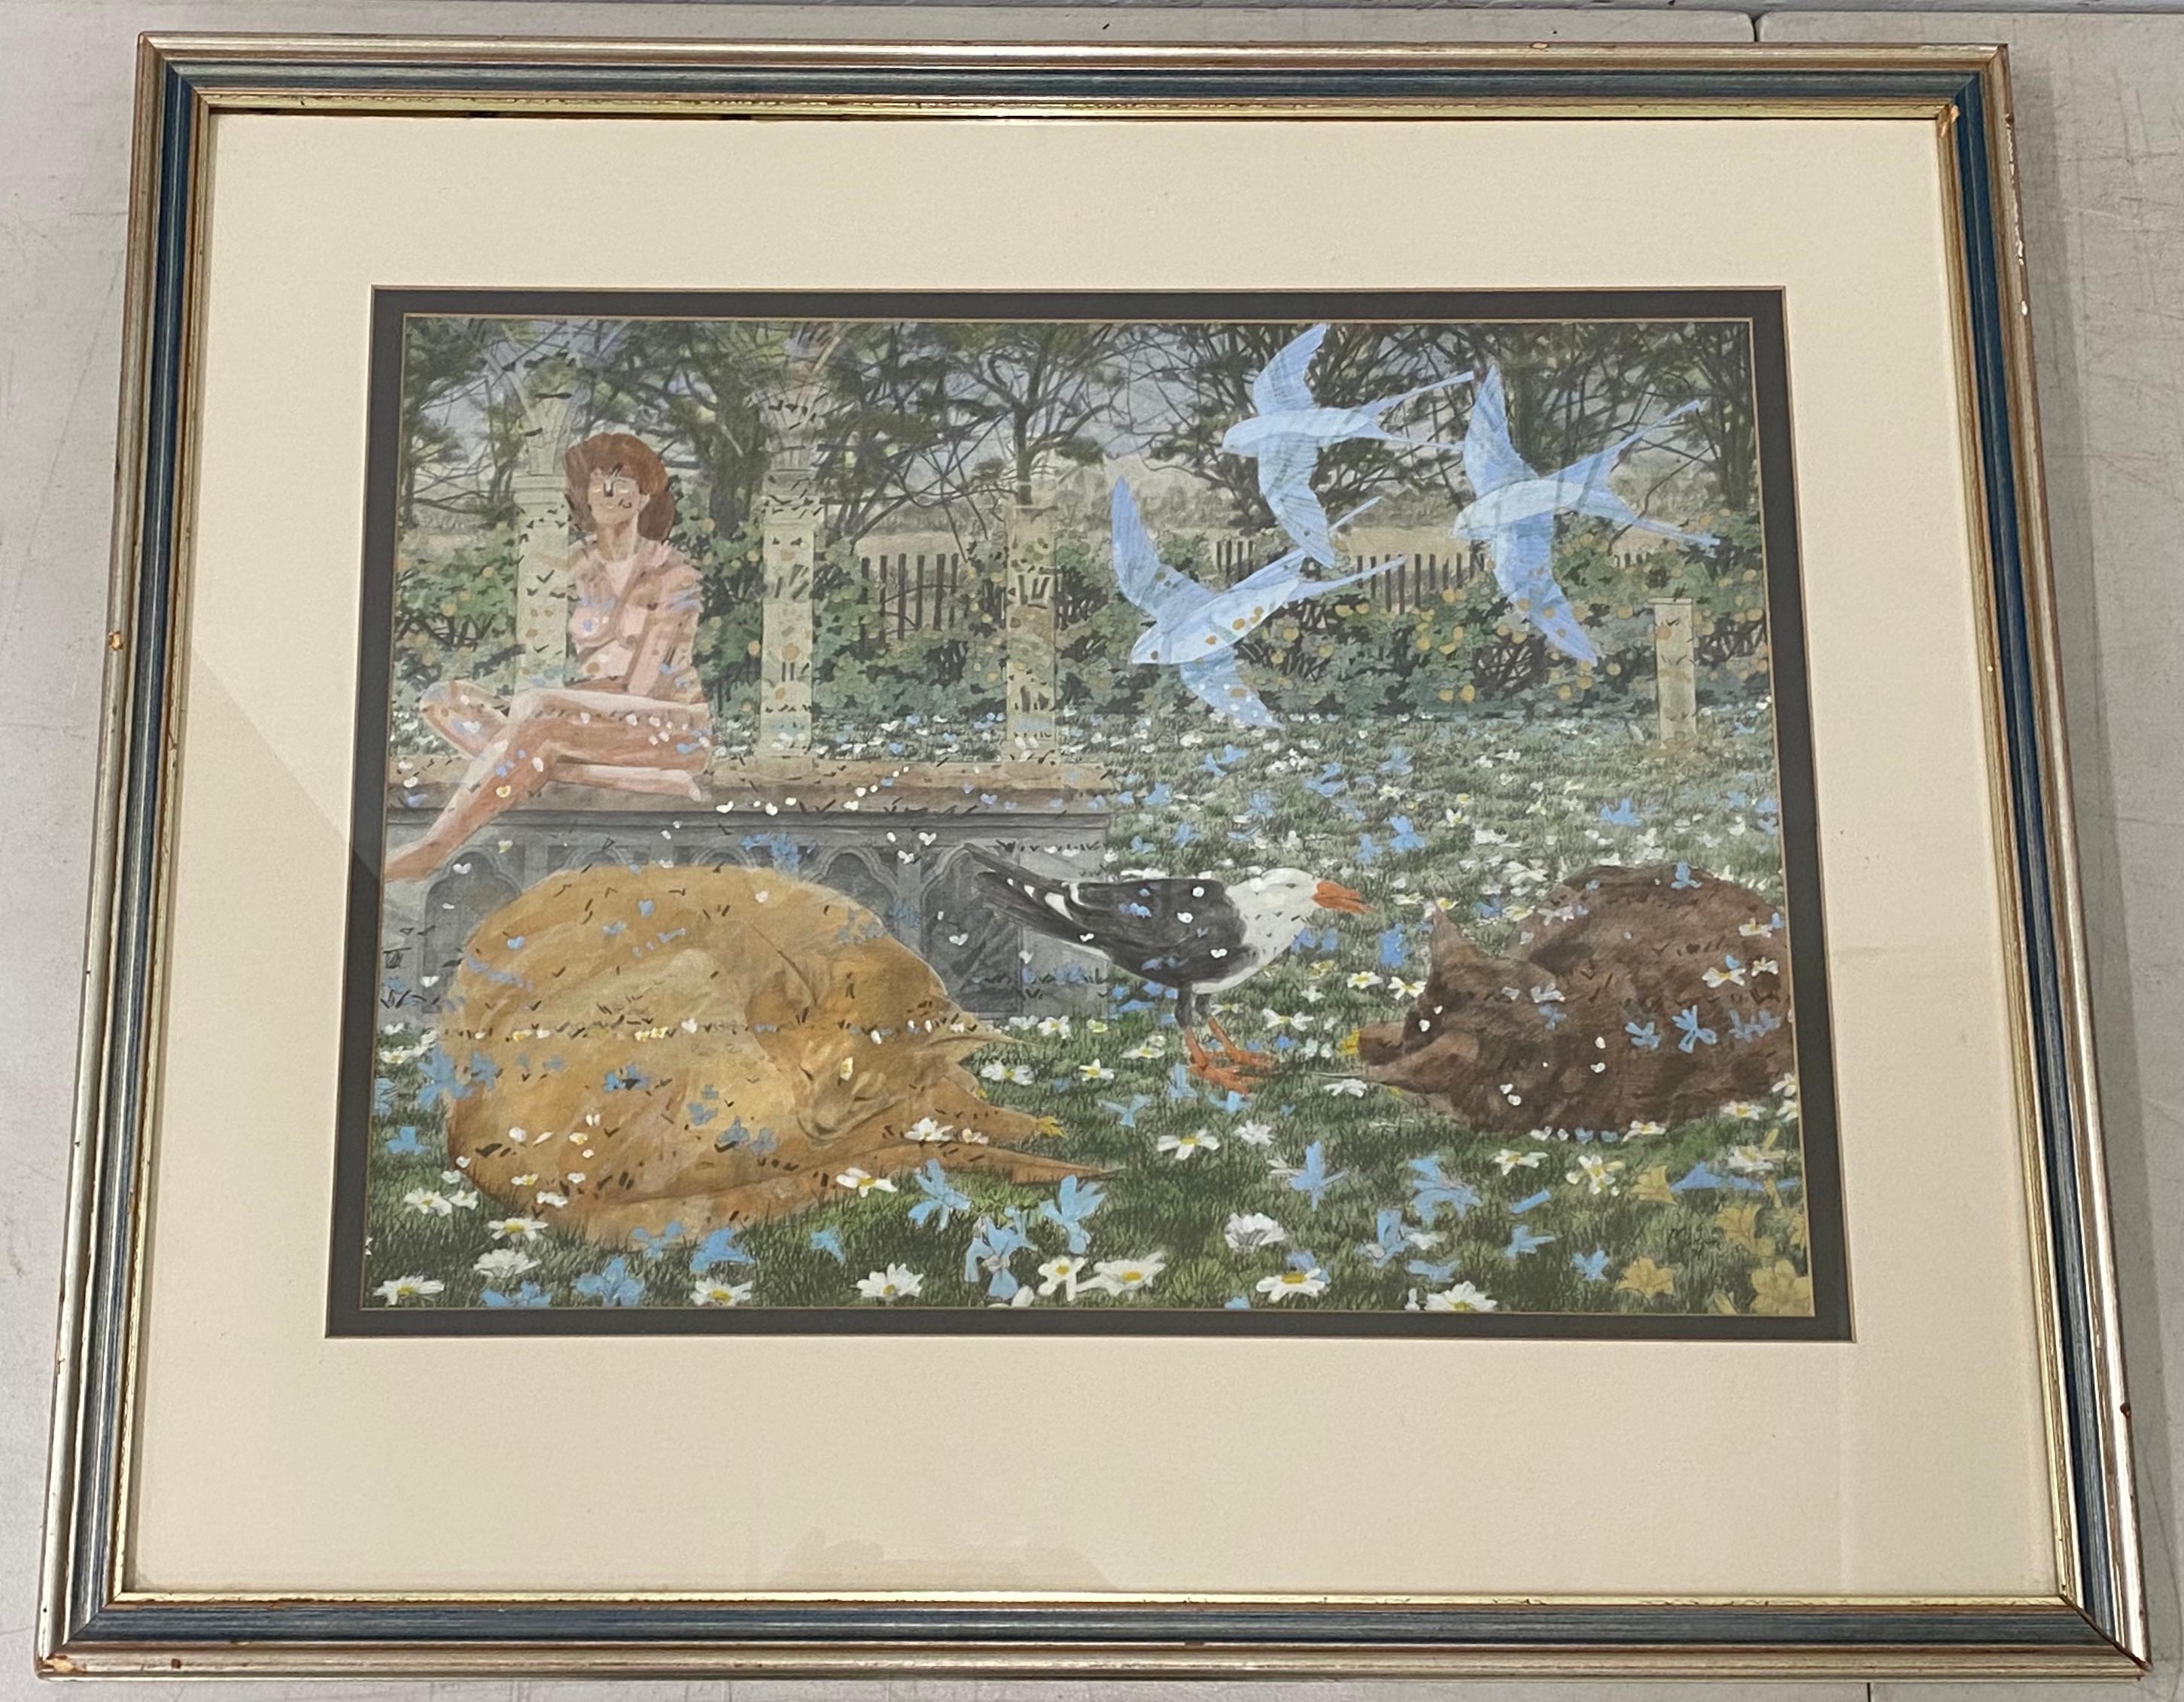 Vintage Day Dream Landscape With Nude, Cats & Birds by Morgan 20th C